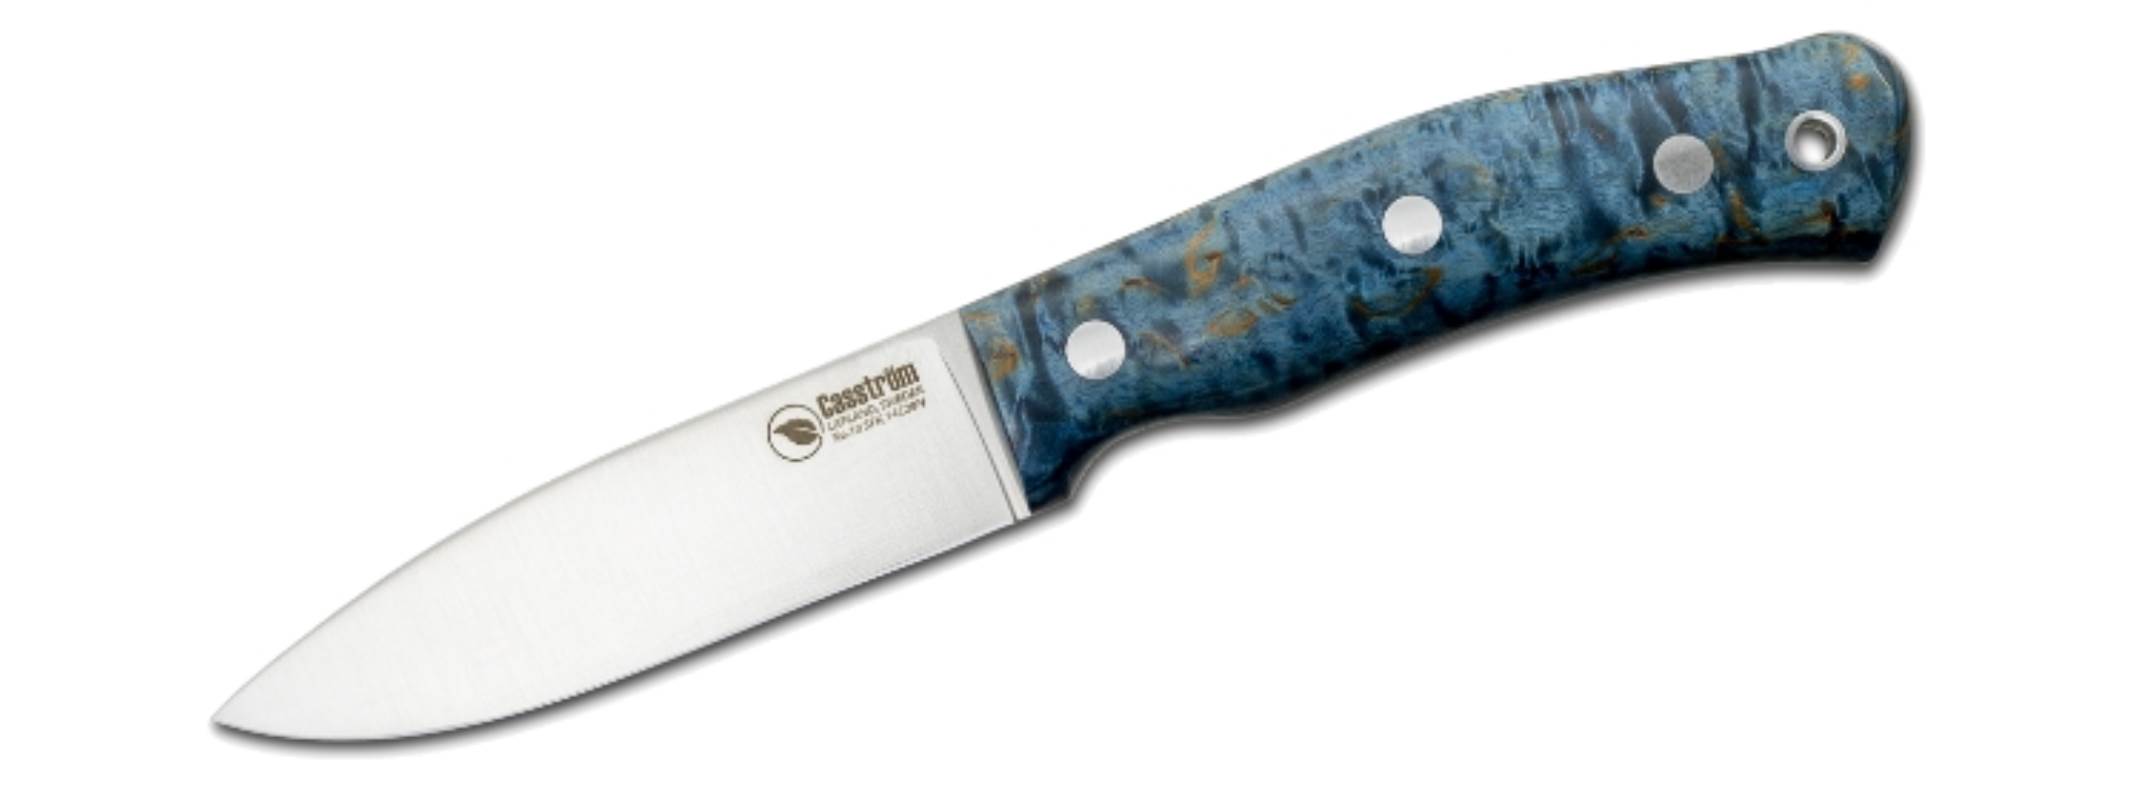 No. 10 Blue Stabilised Curly Birch Knife - Fixed Hunting Knives at